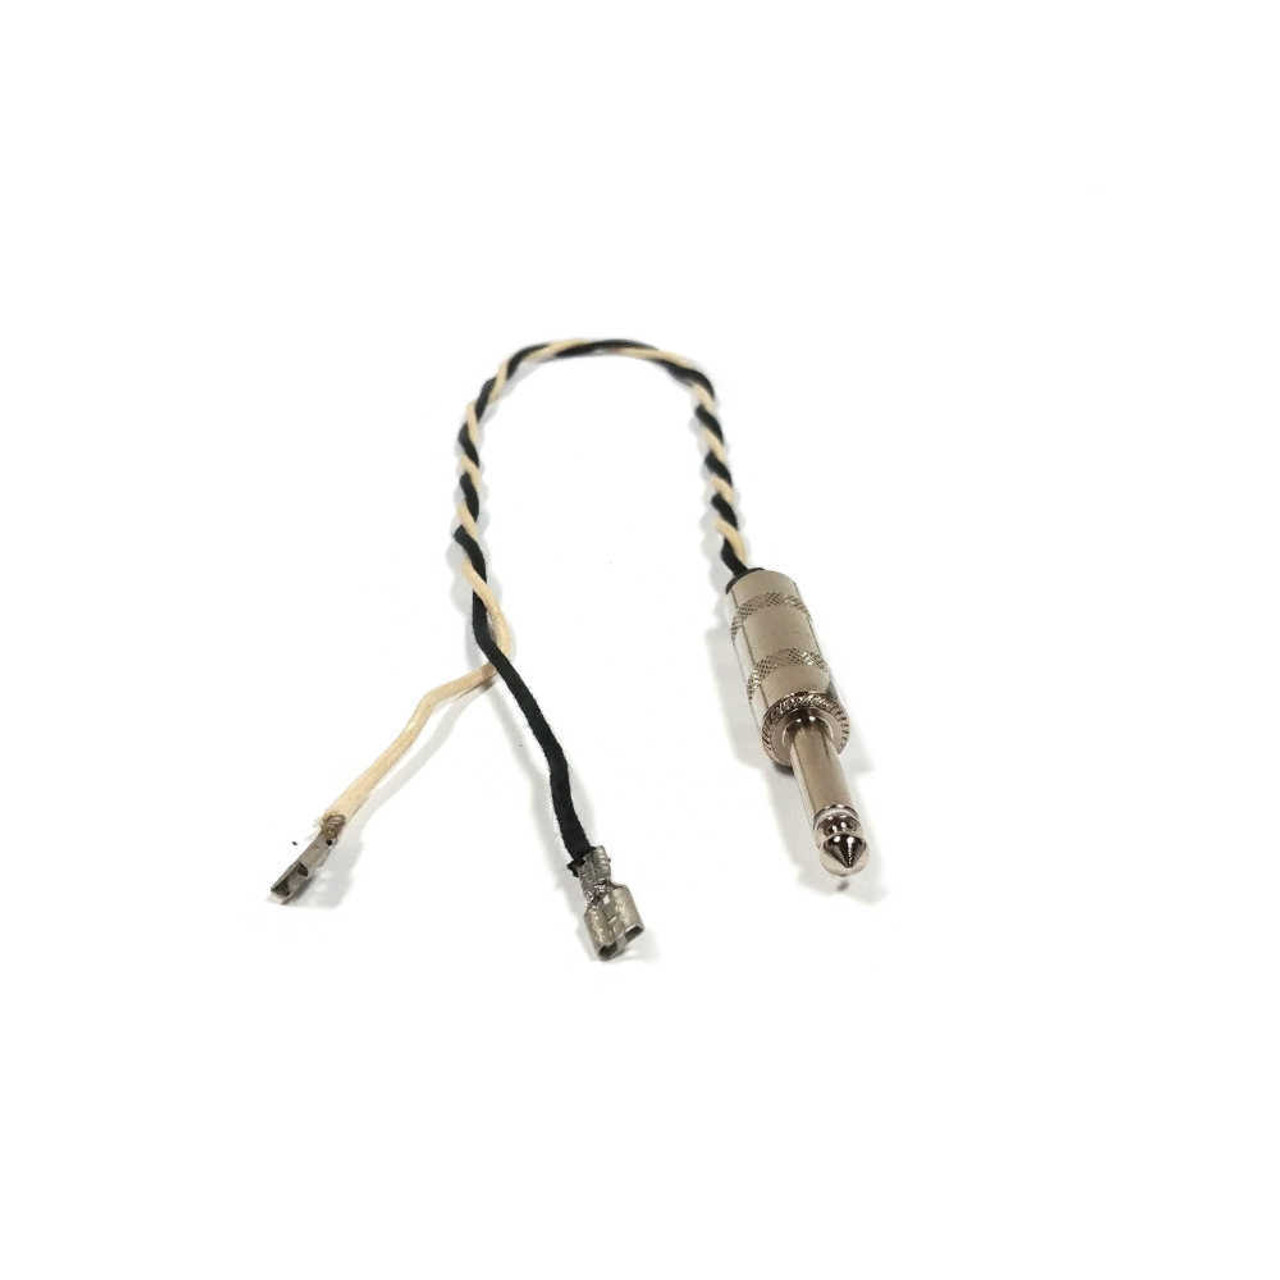 Wiring Harness - For Combo Amp (280)